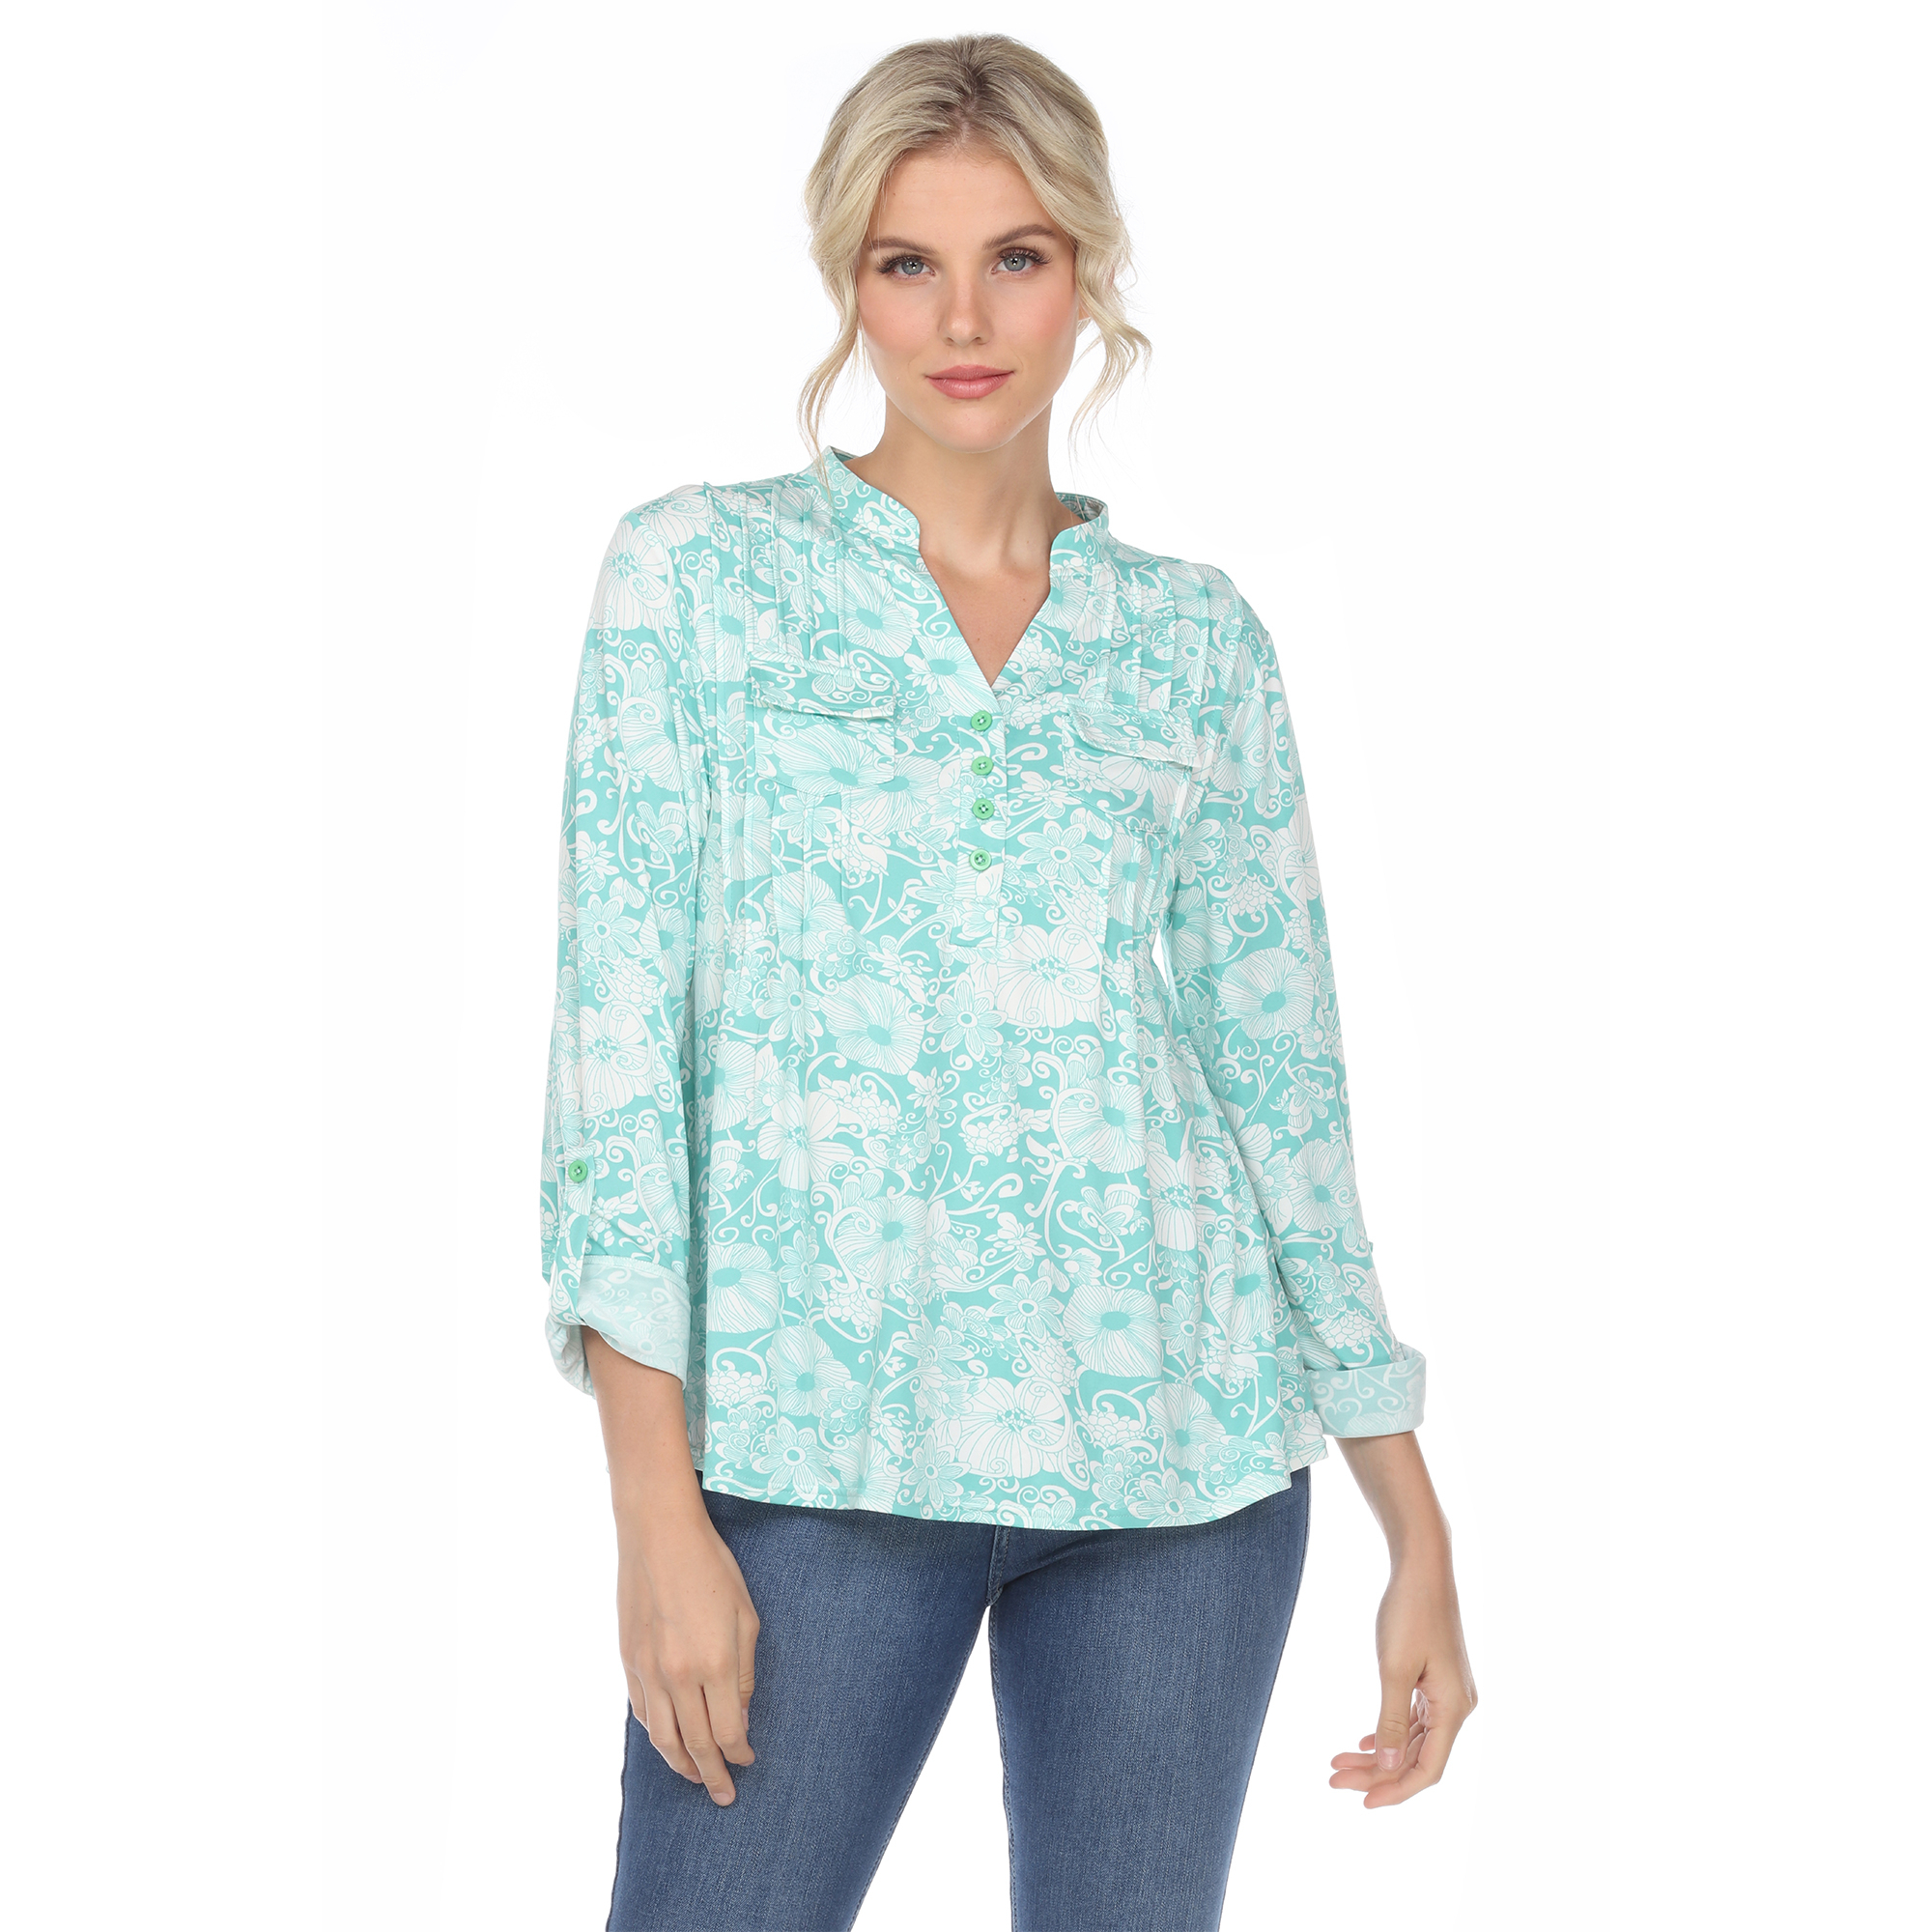 White Mark Women's Pleated Long Sleeve Floral Print Blouse - Mint, 2X